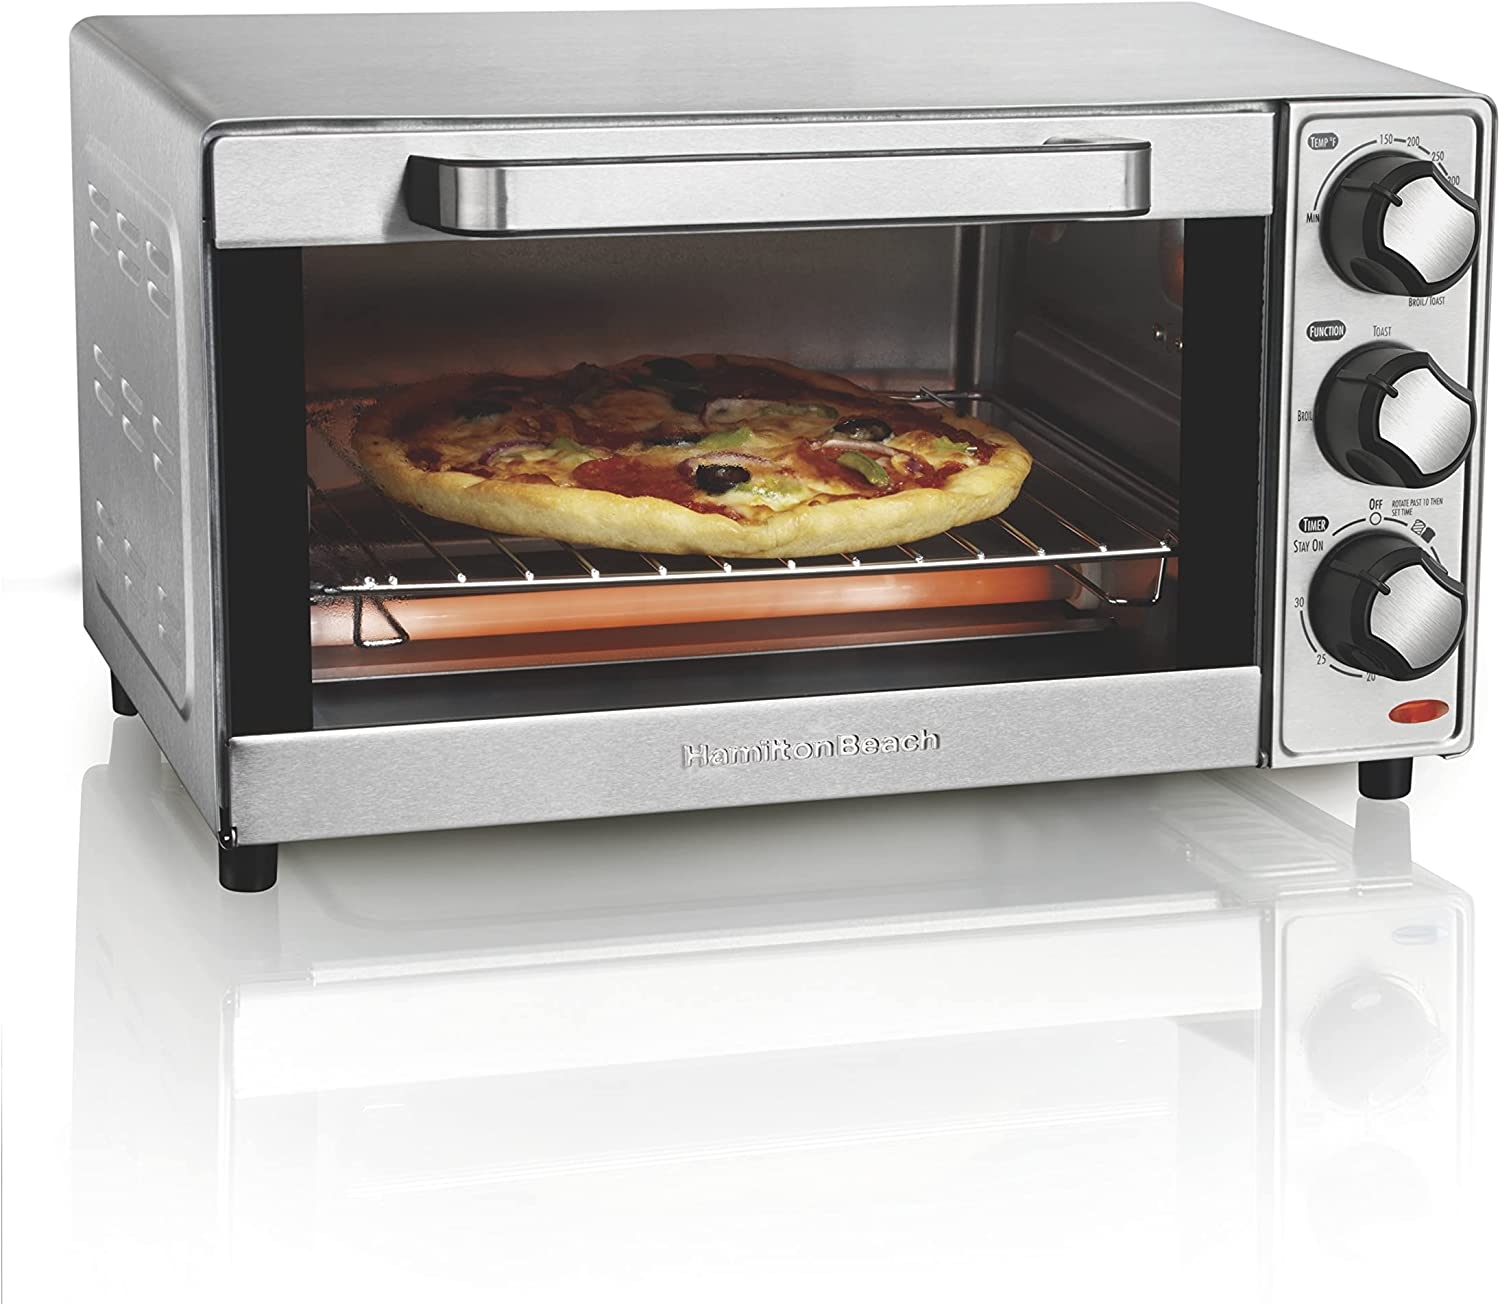 Hamilton Beach Countertop Toaster Oven & Pizza Maker Large 4-Slice Capacity, Stainless Steel (31401) Import To Shop ×Product